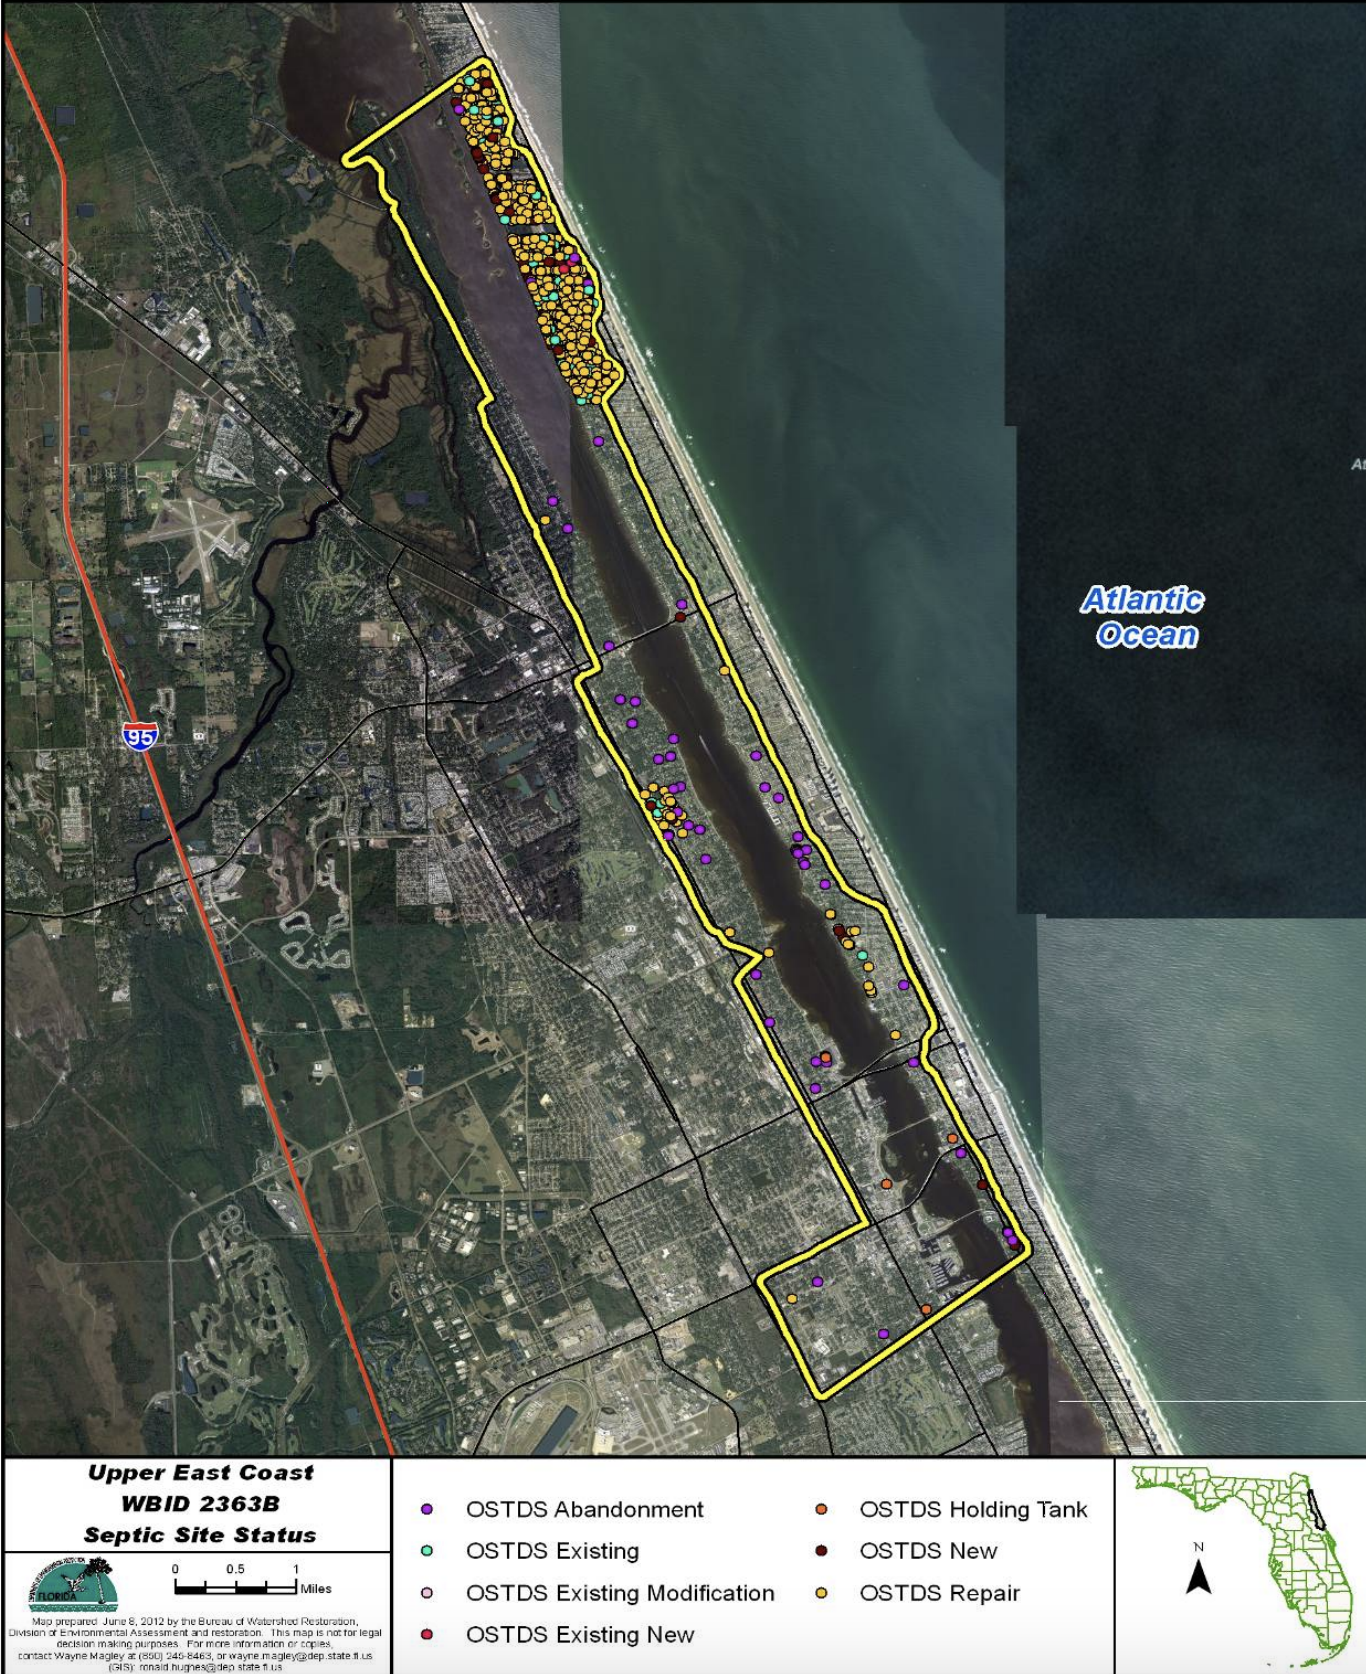 On-site sewage treatment and disposal systems in the Halifax River Watershed in 2012. Courtesy of the Florida Department of Environmental Protection